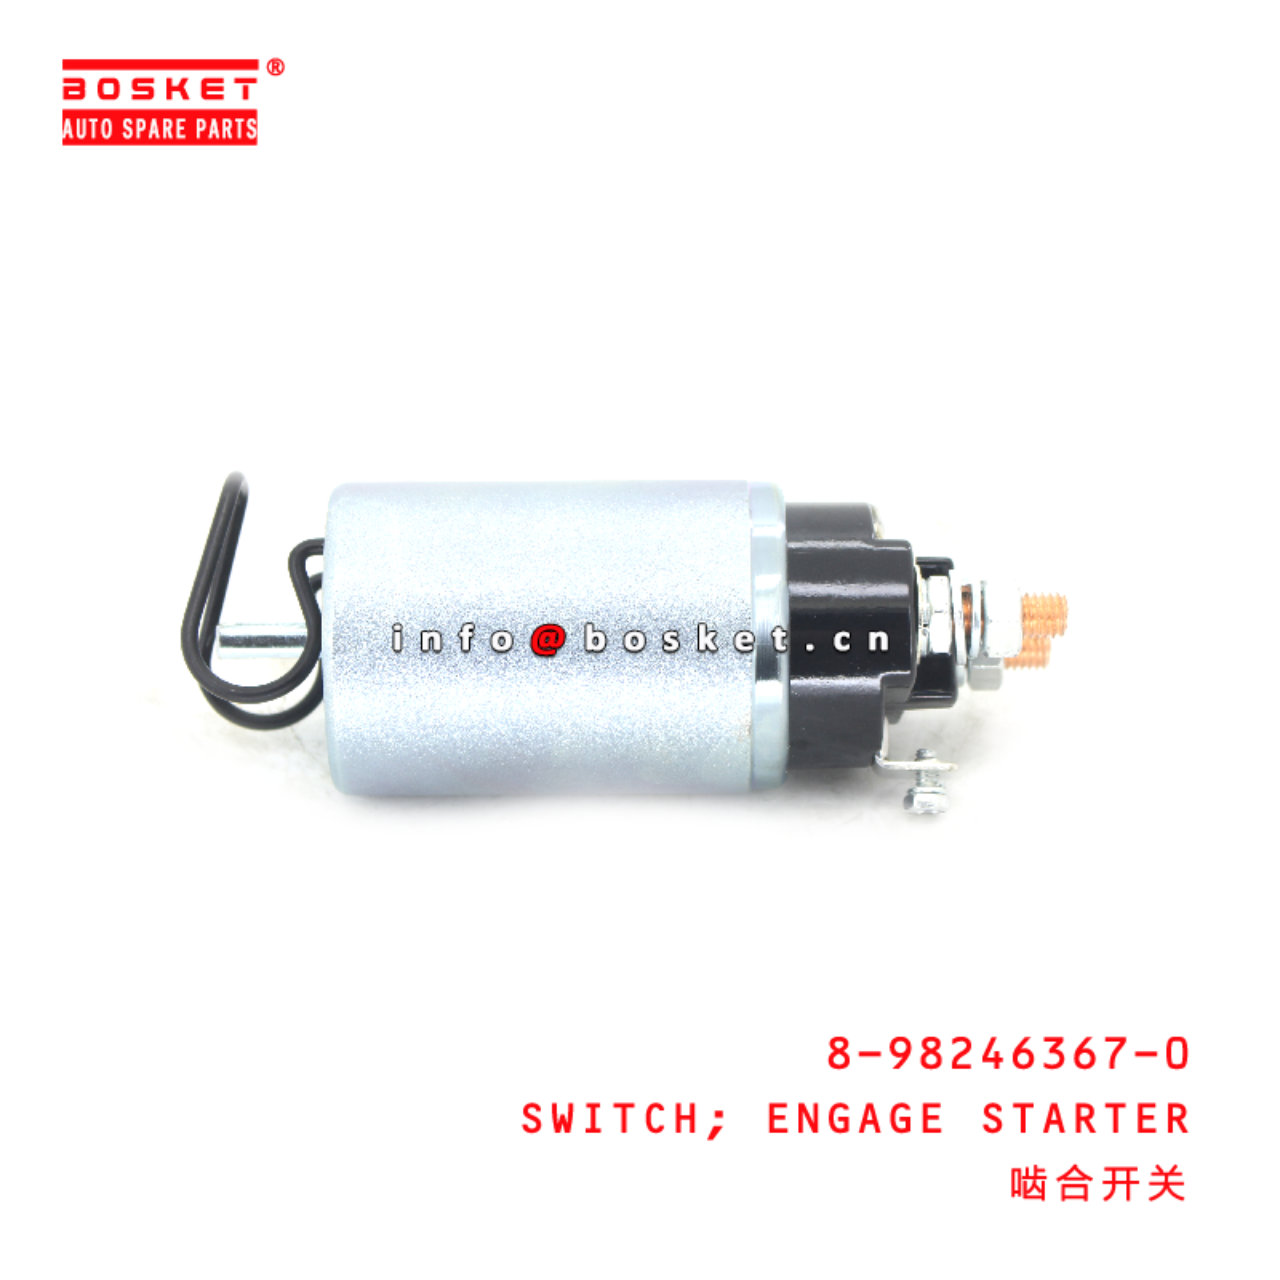 8-98246367-0 Engage Starter Switch suitable for IS...